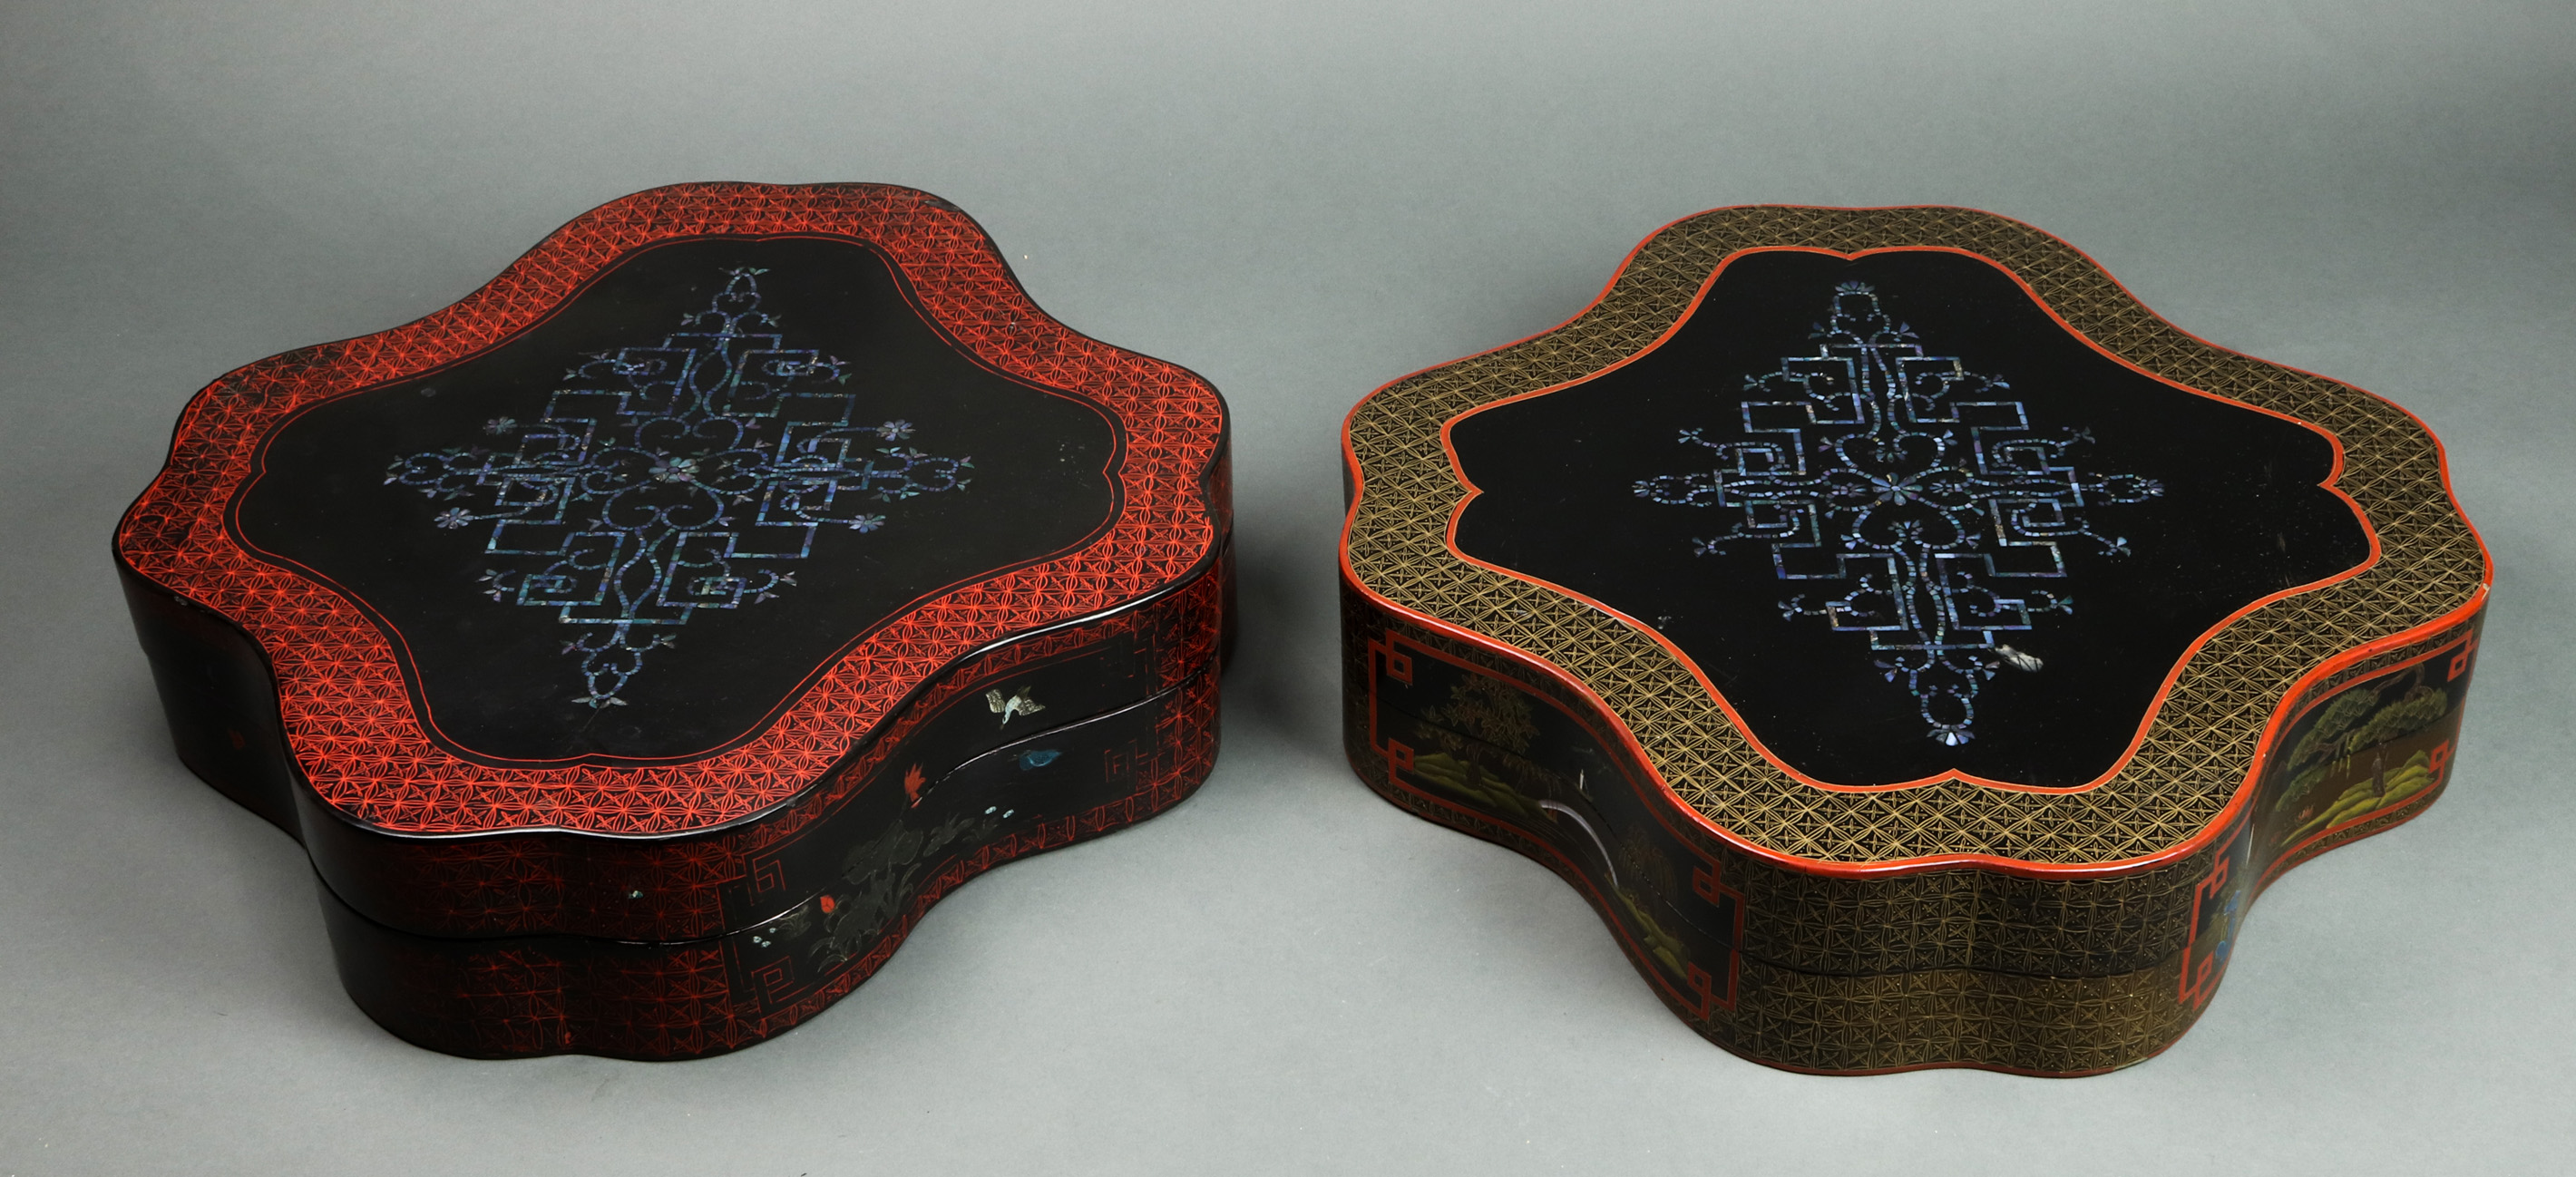  LOT OF 2 CHINESE LACQUERED BOXES 3a3e8a